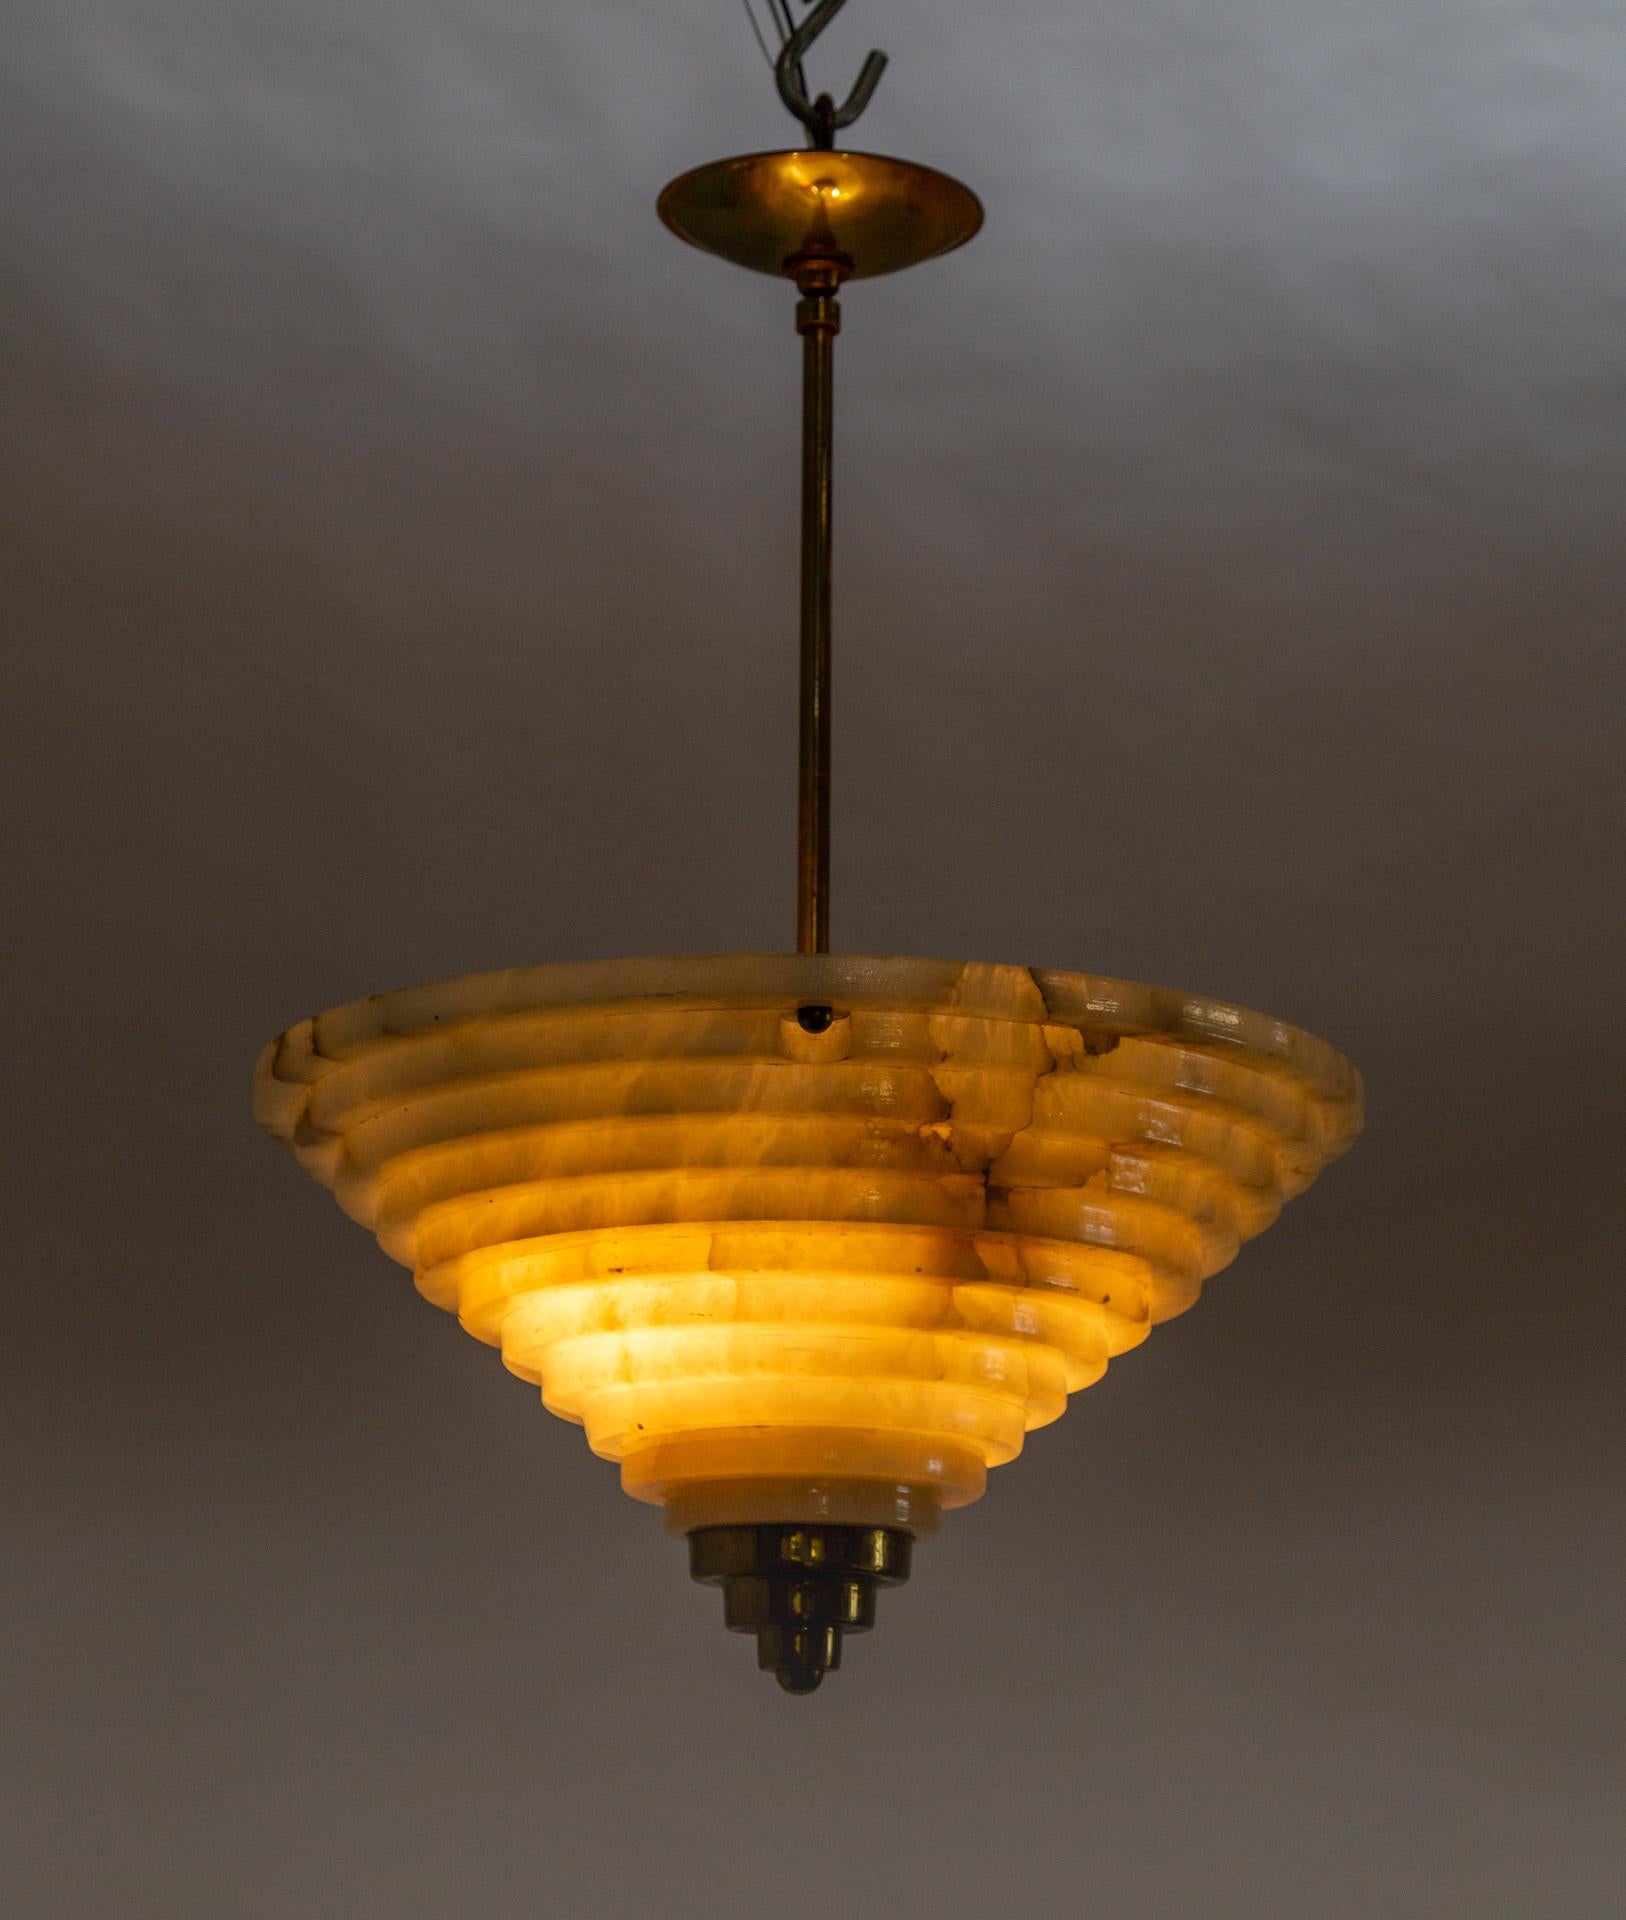 An Art Deco pendant light with a carved alabaster shade in an inverted stepped cone shape from a central patinated brass stem. The alabaster has a complex pattern of natural dark veining and is accented with a stepped brass point. It looks beautiful